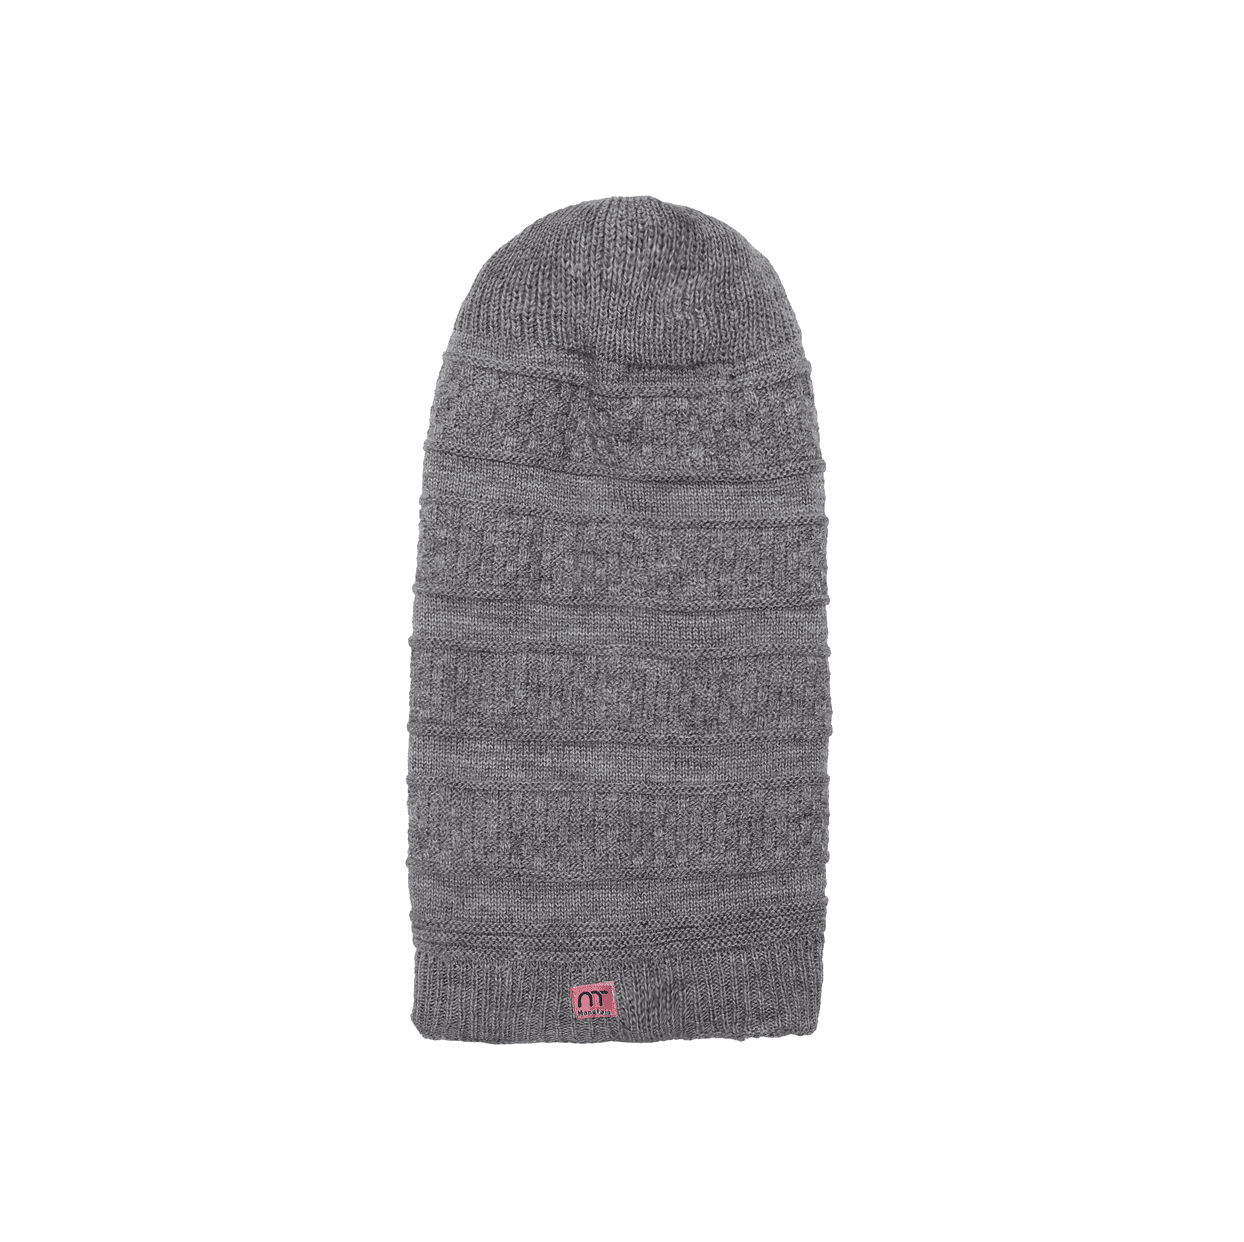 Satin Lined Beanie - Manetain Store